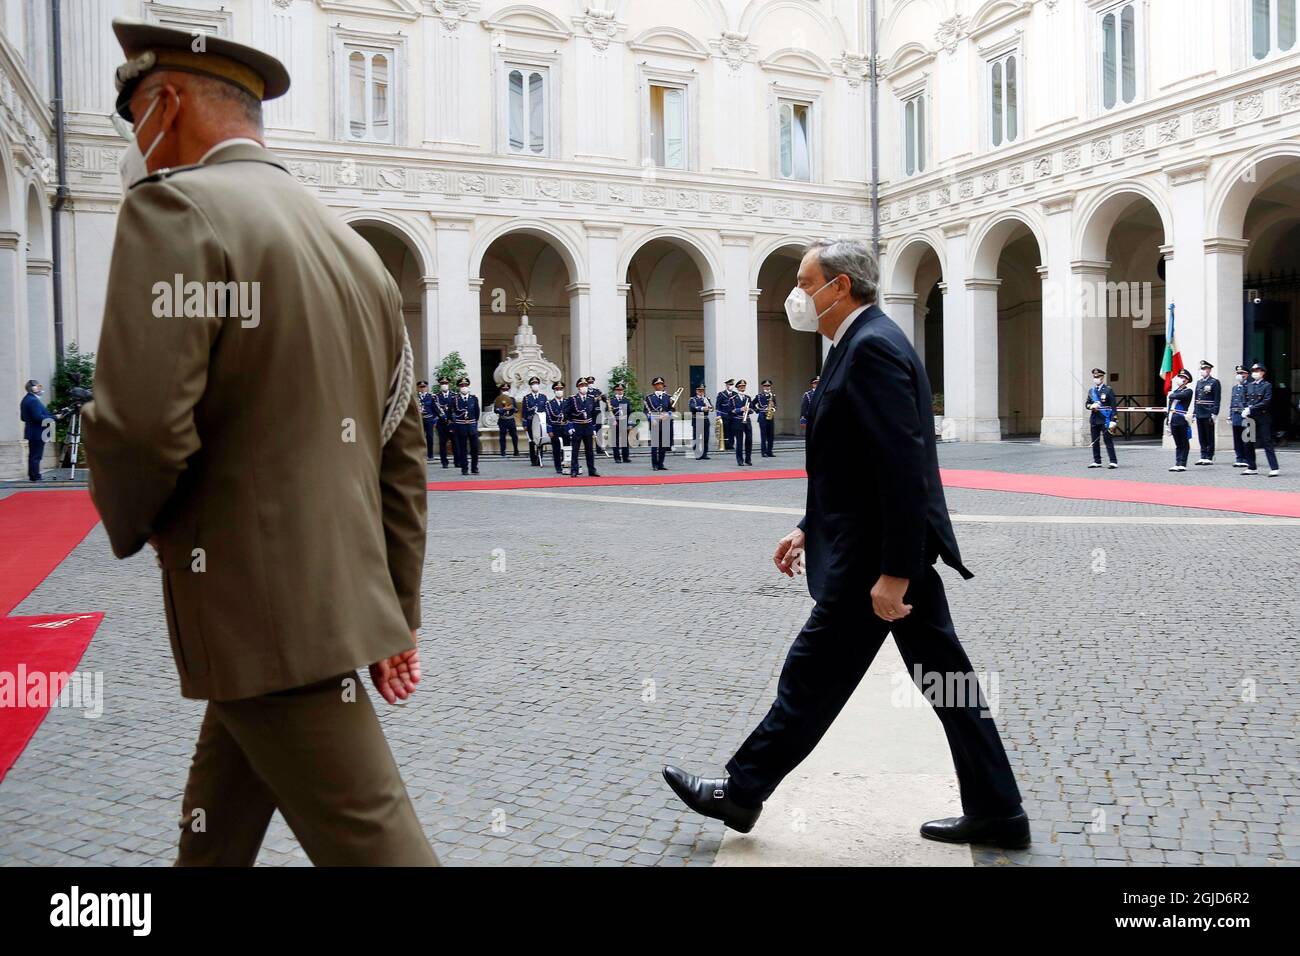 The Italian premier Mario Draghi goes to welcome the President of the European Council at Palazzo Chigi.Rome (Italy), September 6th 2021 Photo Samantha Zucchi Insidefoto Stock Photo